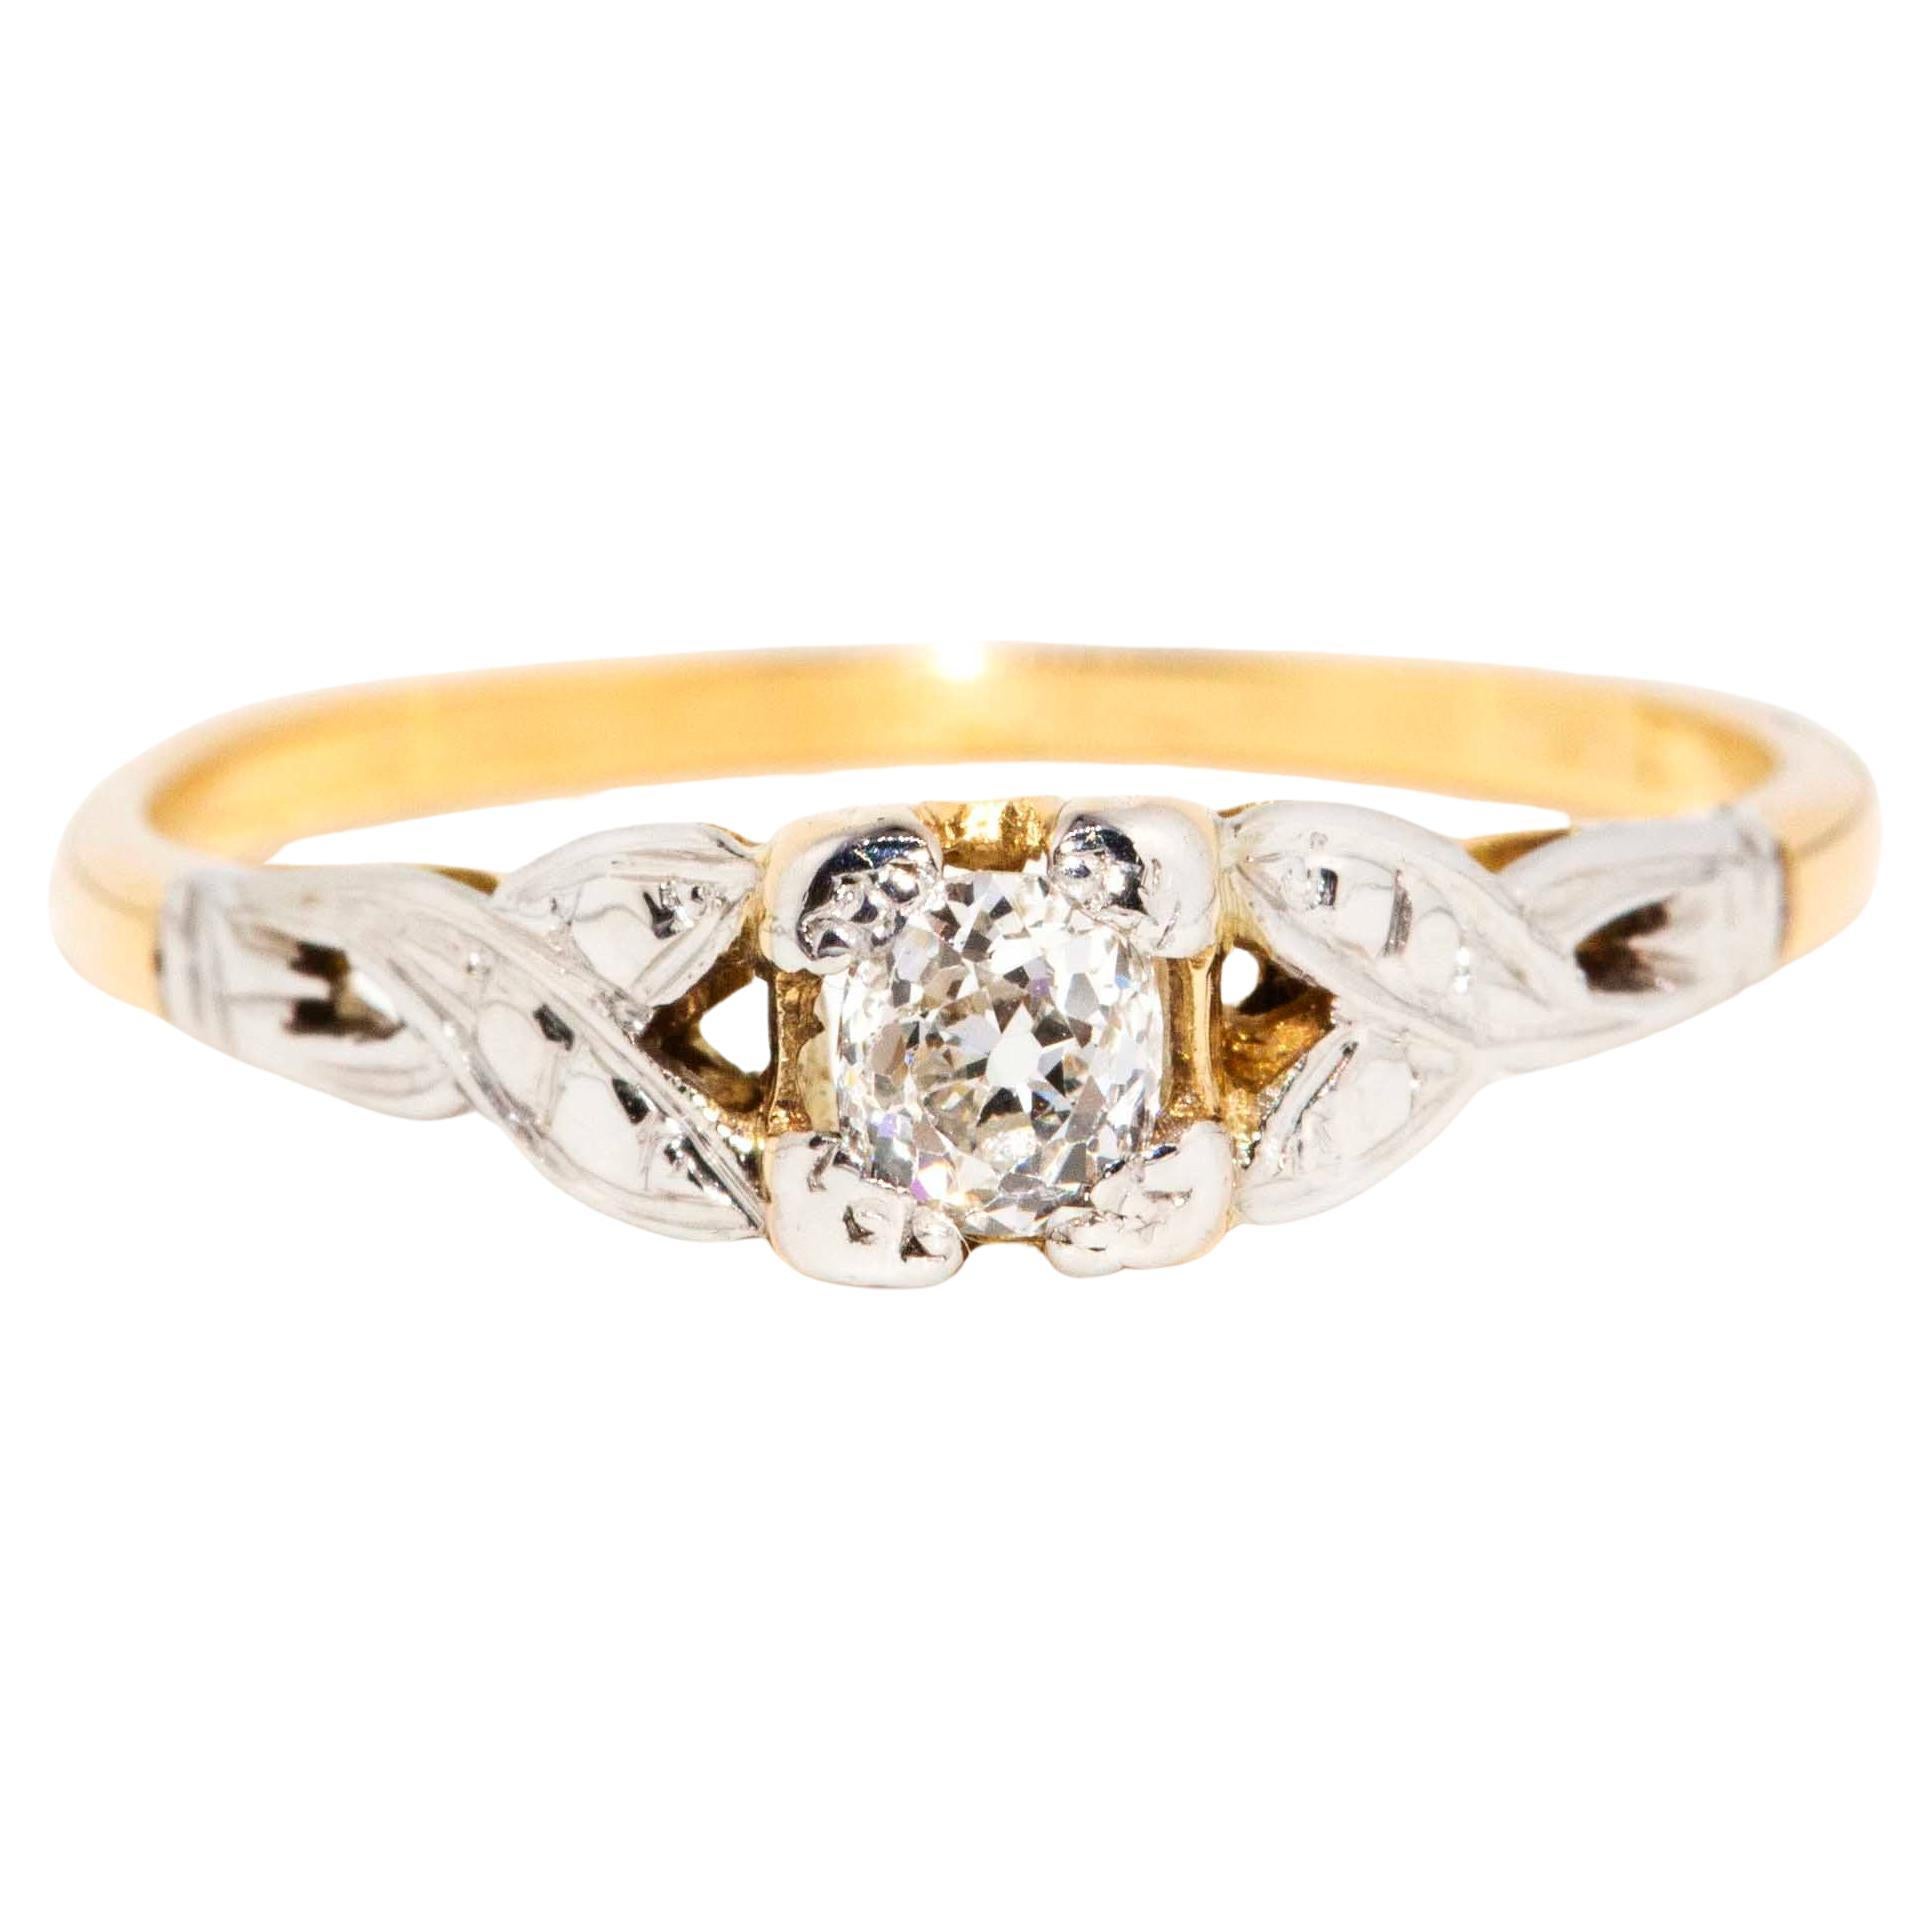 Vintage Circa 1930s Old Cut Diamond Solitaire Ring 15 Carat Yellow & White Gold For Sale